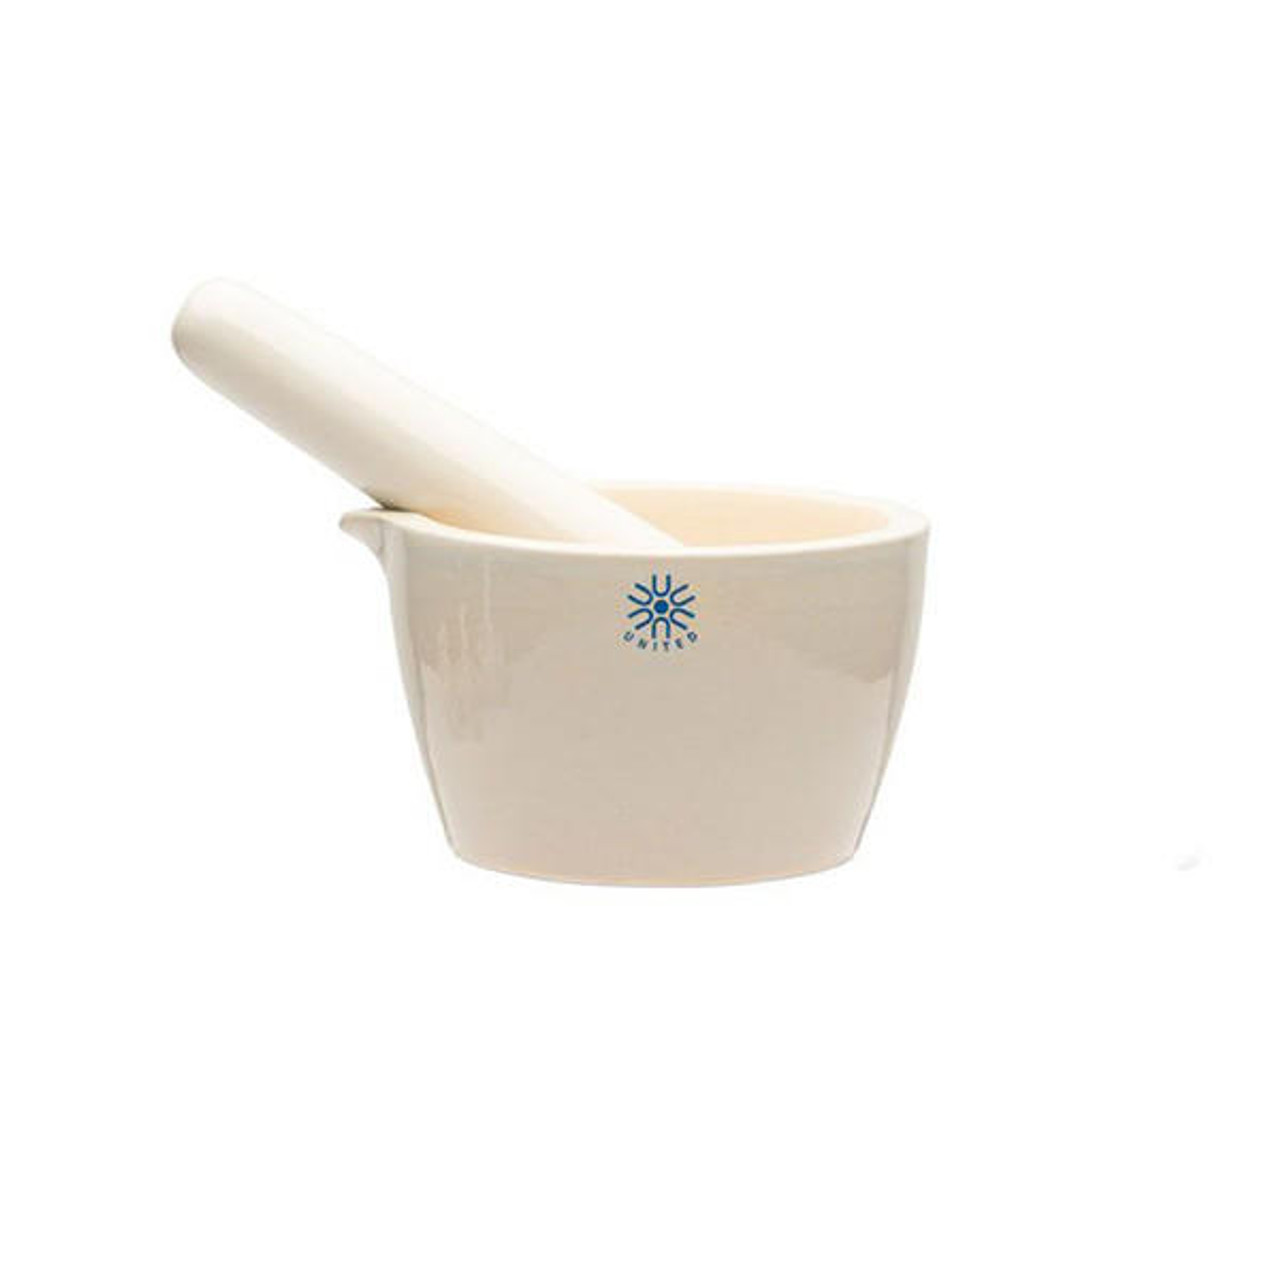 https://cdn11.bigcommerce.com/s-zgzol/images/stencil/1280x1280/products/52499/133646/united-scientific-jmd400-mortar-and-pestle-set-porcelain-capacity-400ml__00903.1673914191.jpg?c=2